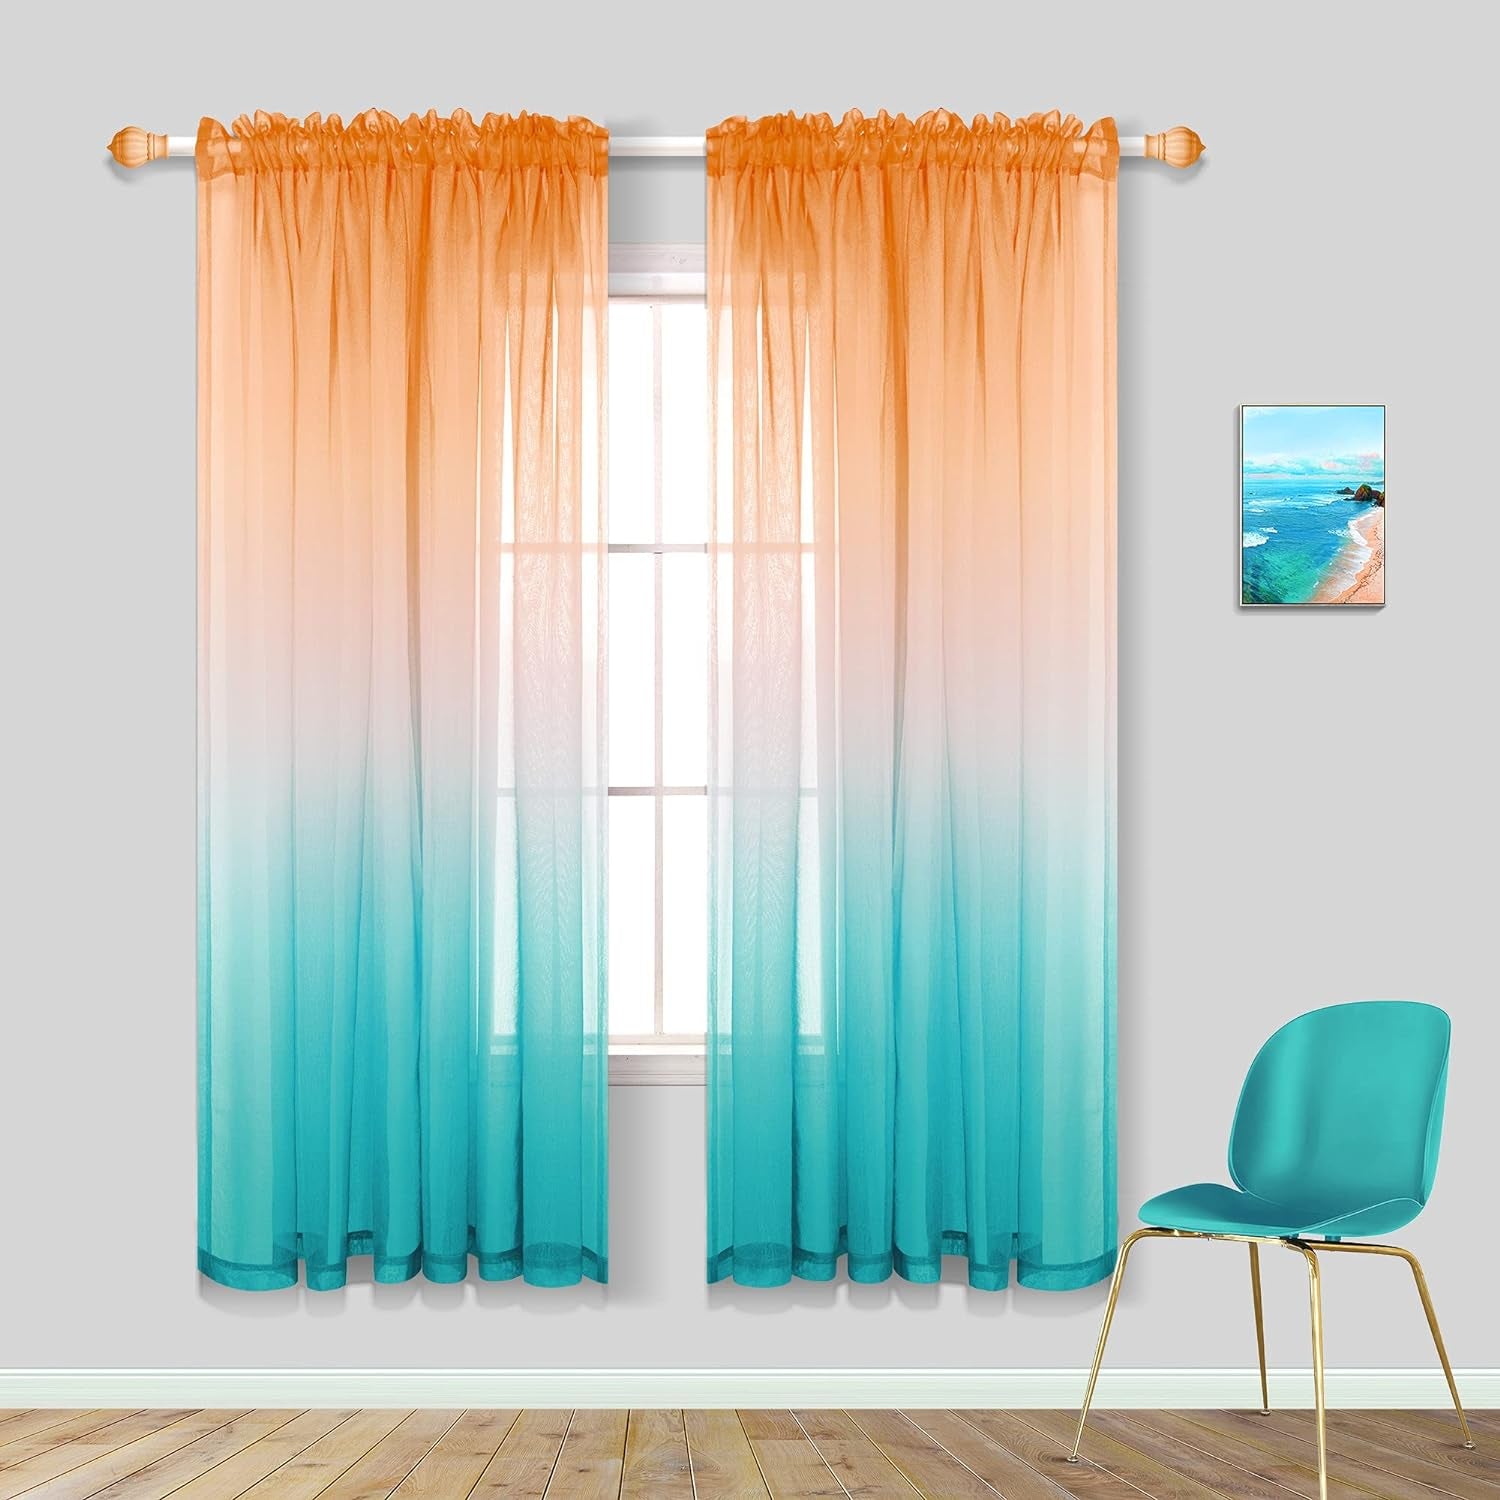 Kitchen Curtains Yellow Lemon and Light Grey Sheer Bathroom Window Curtains 42 X 45 Inch Length Sunflower Yellow and Gray  PITALK TEXTILE Orange And Turquoise 52X63 